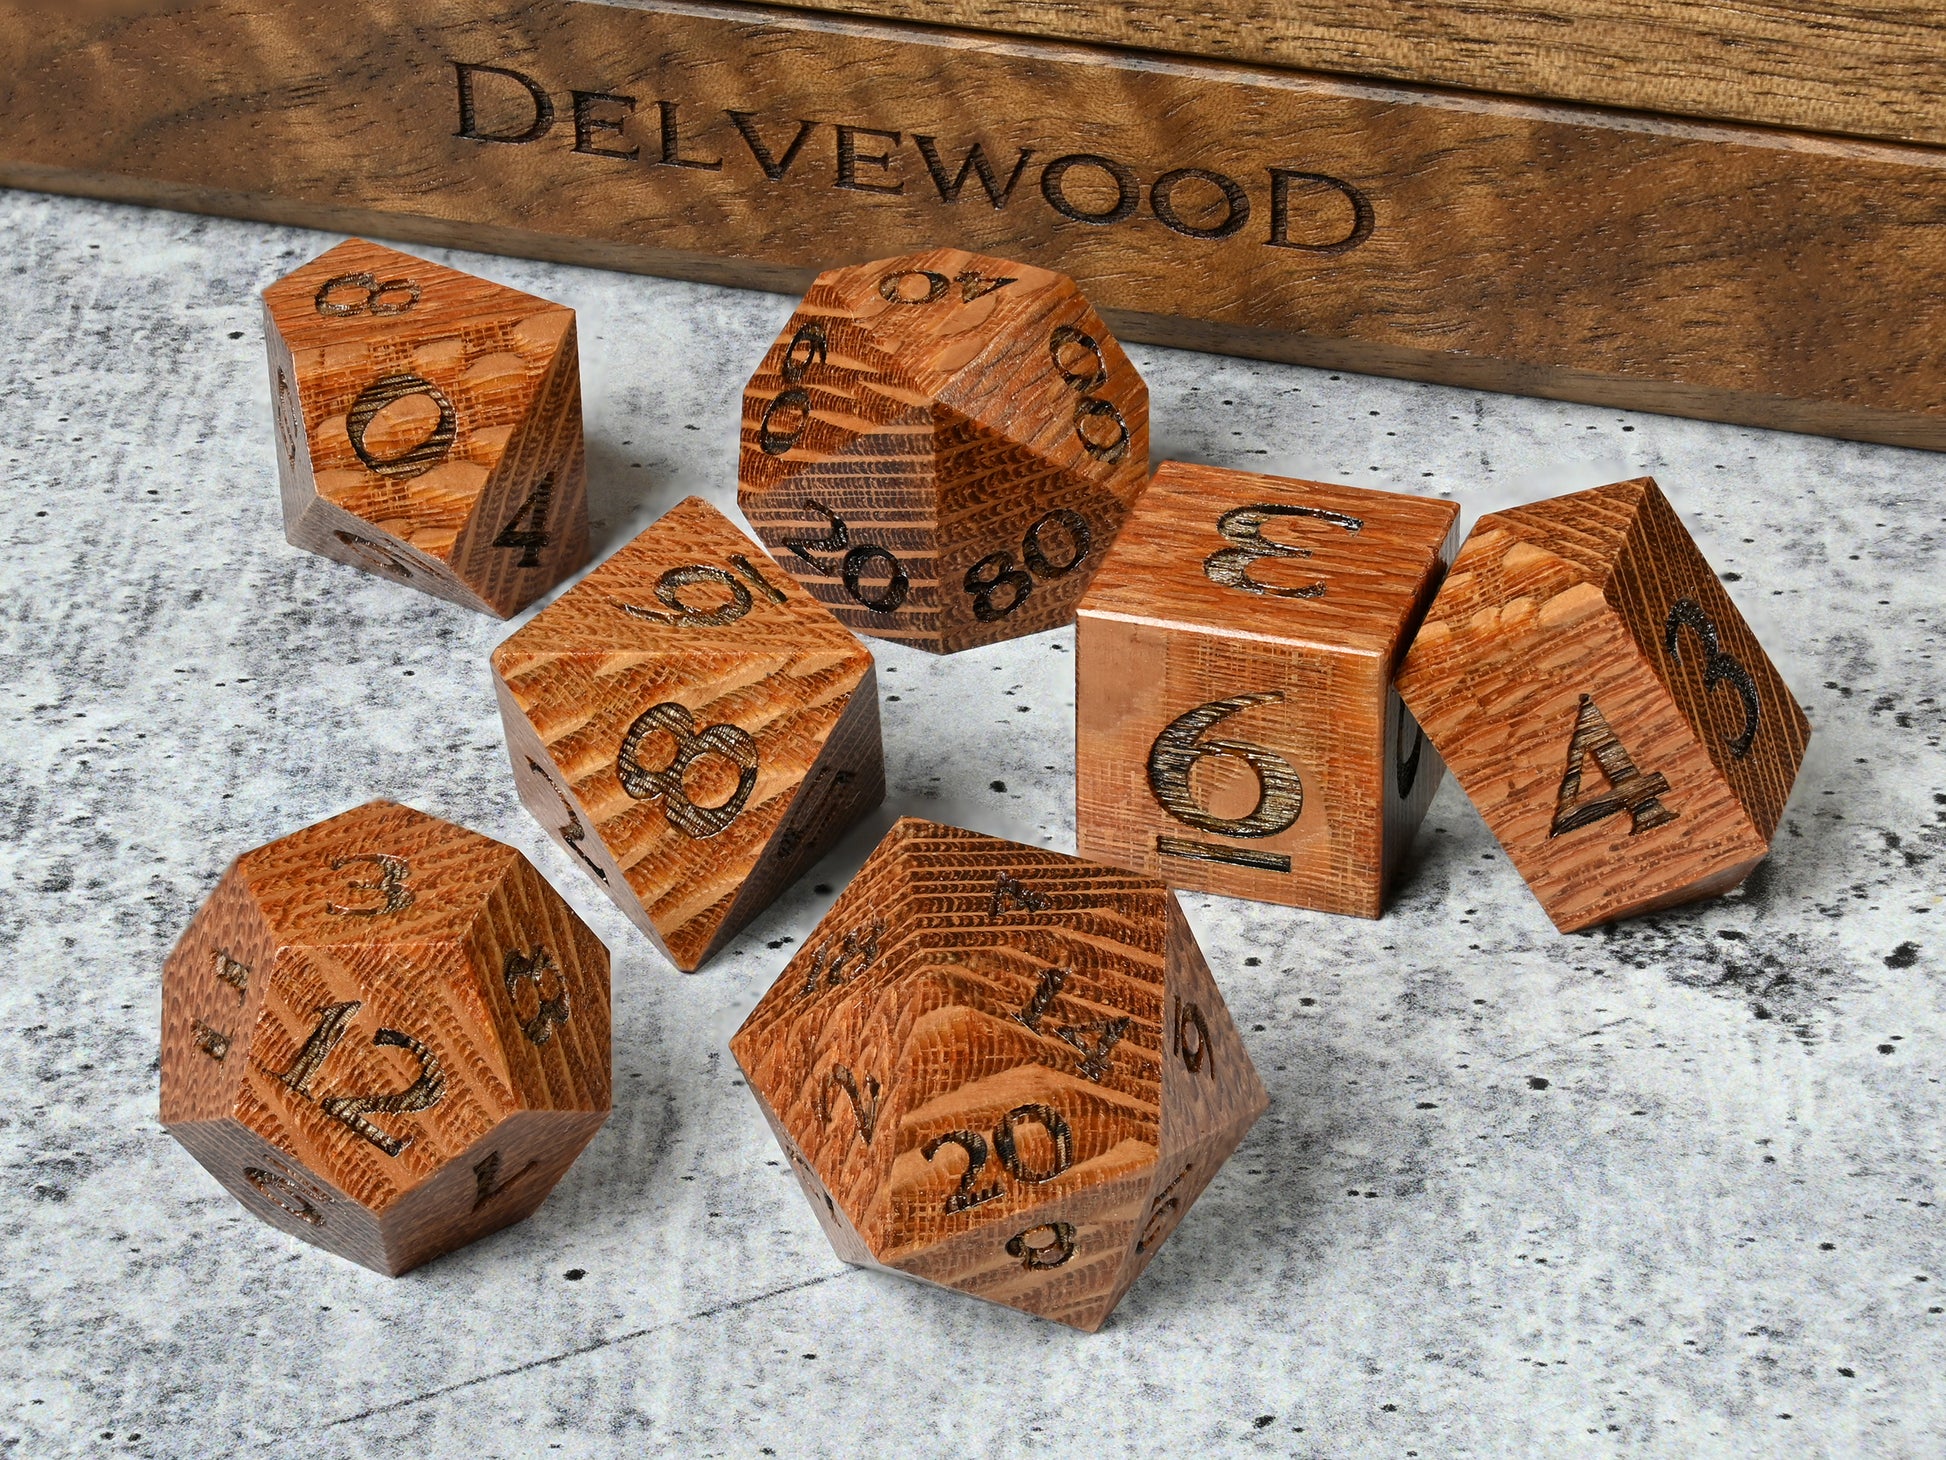 leopardwood dice set for dnd rpg tabletop gaming in front of Delvewood delver's kit dice box.